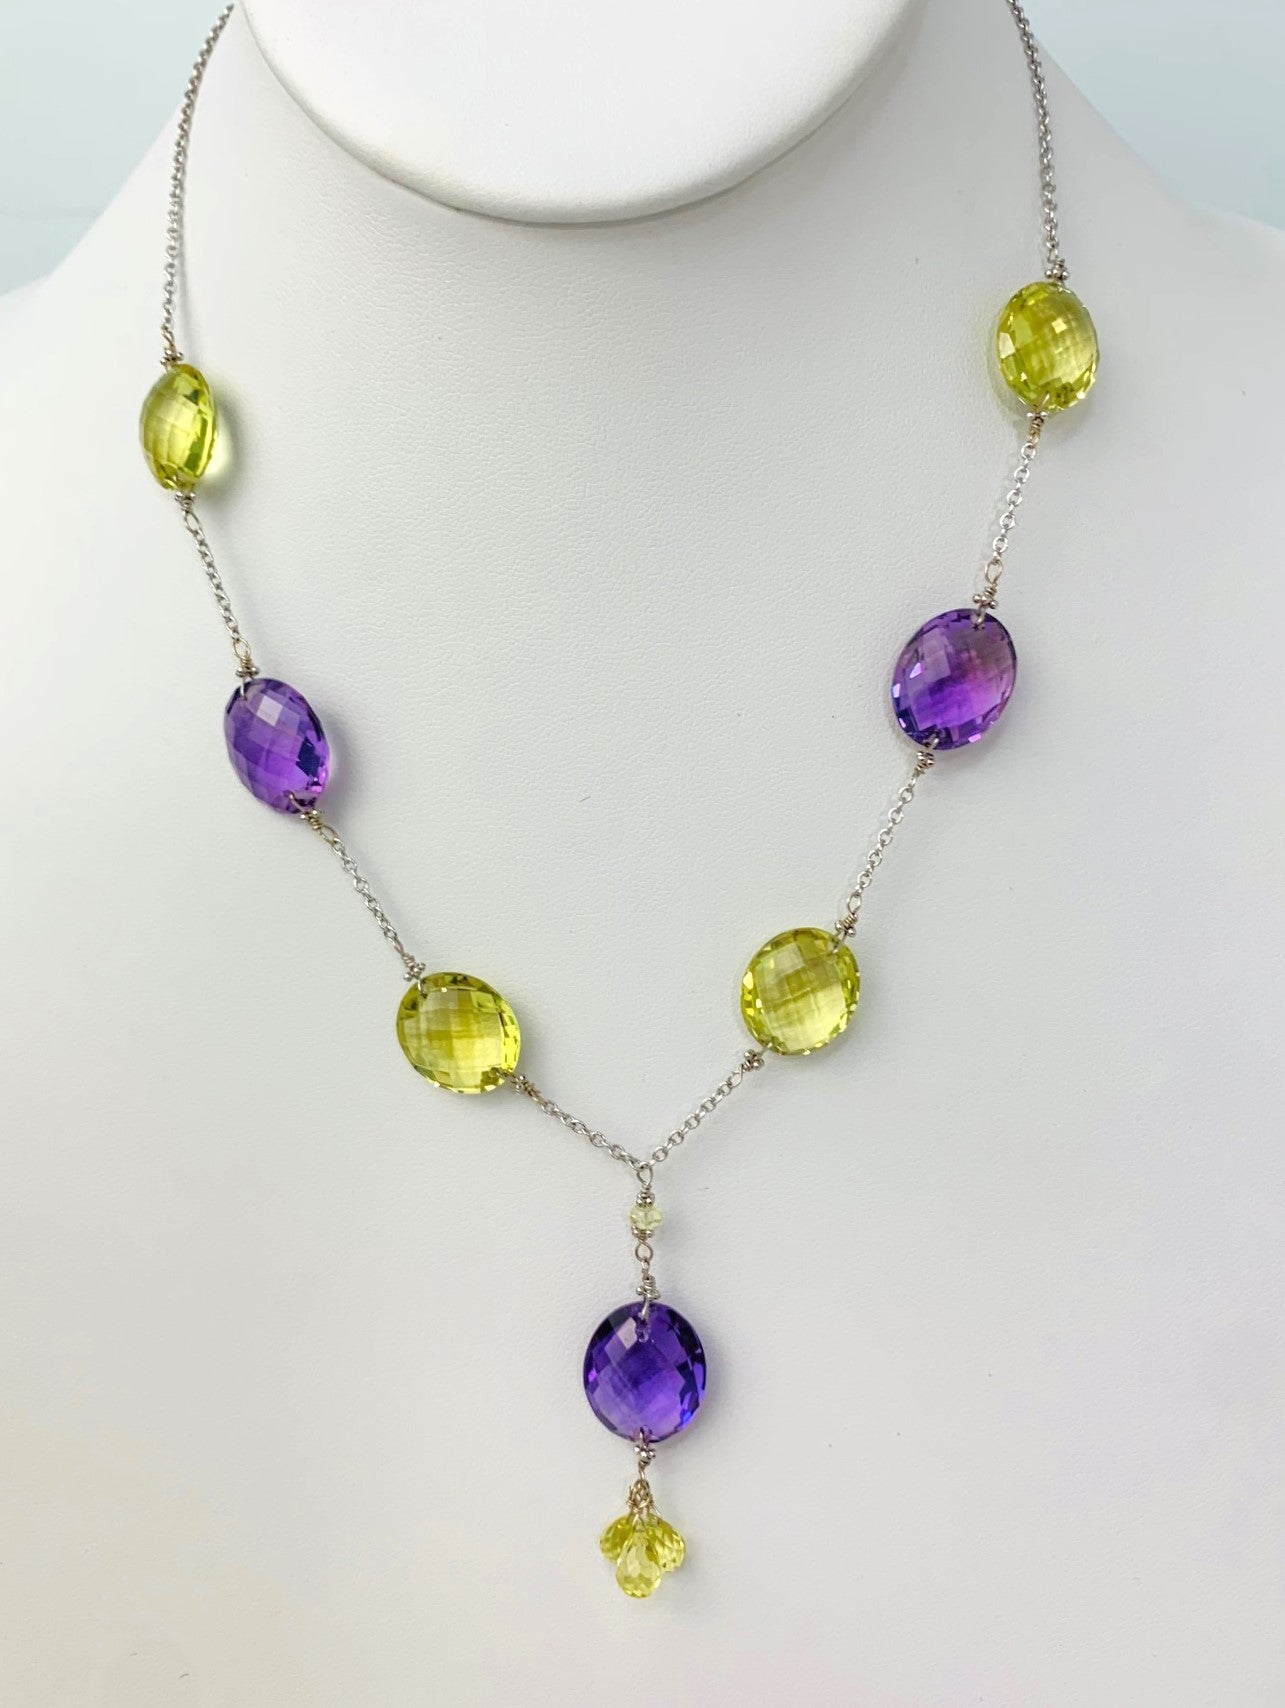 Clearance Sale! - 17-18" Lemon Quartz And Amethyst Station Necklace With Oval Checkerboard And 3 Briolette Tassel Drop in 14KW - NCK-378-TASTNCGM14W-LQAMY-18